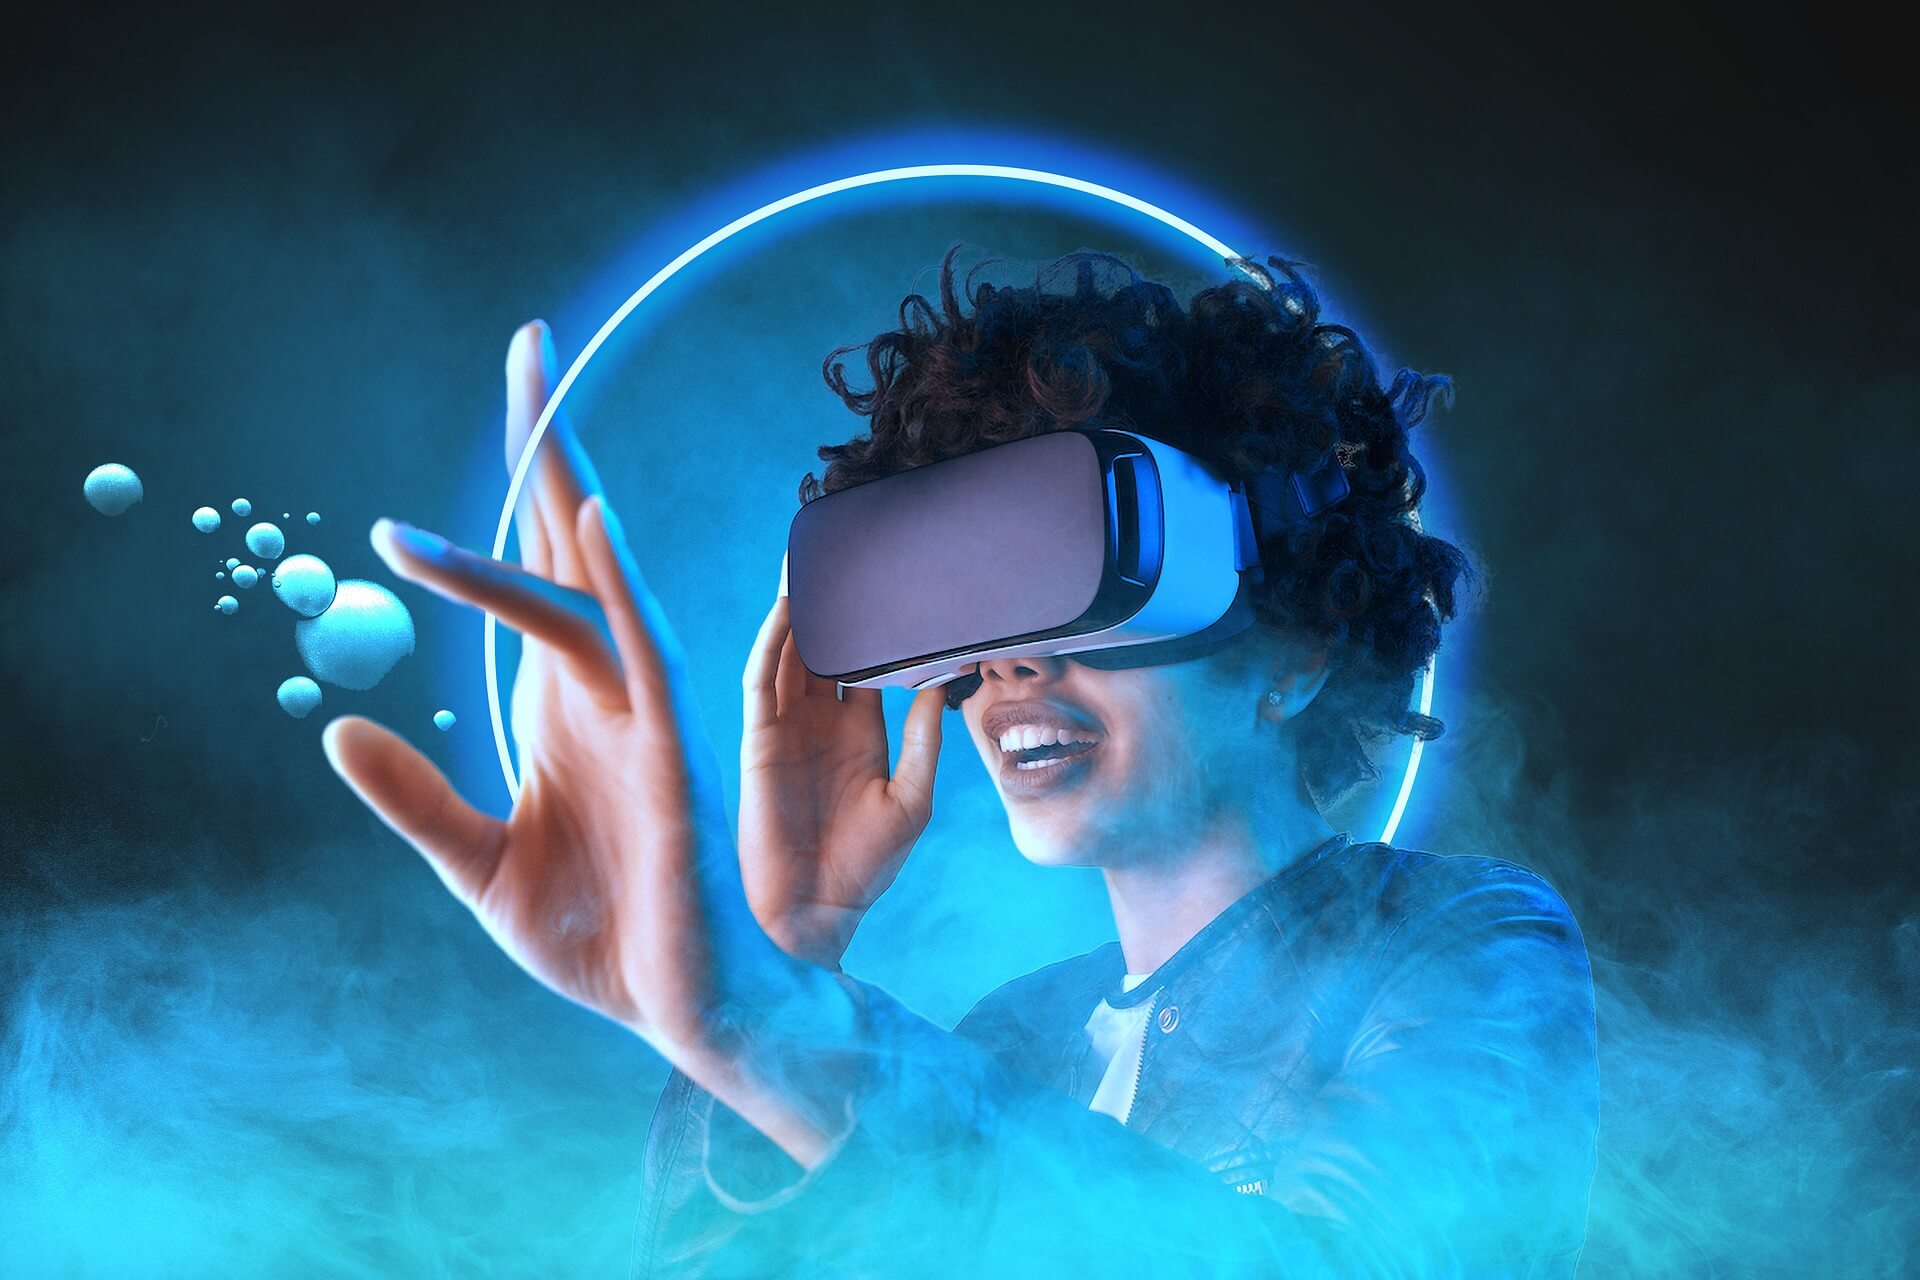 "How to Get Into Metaverse in 2023? A 6-Steps Guide"